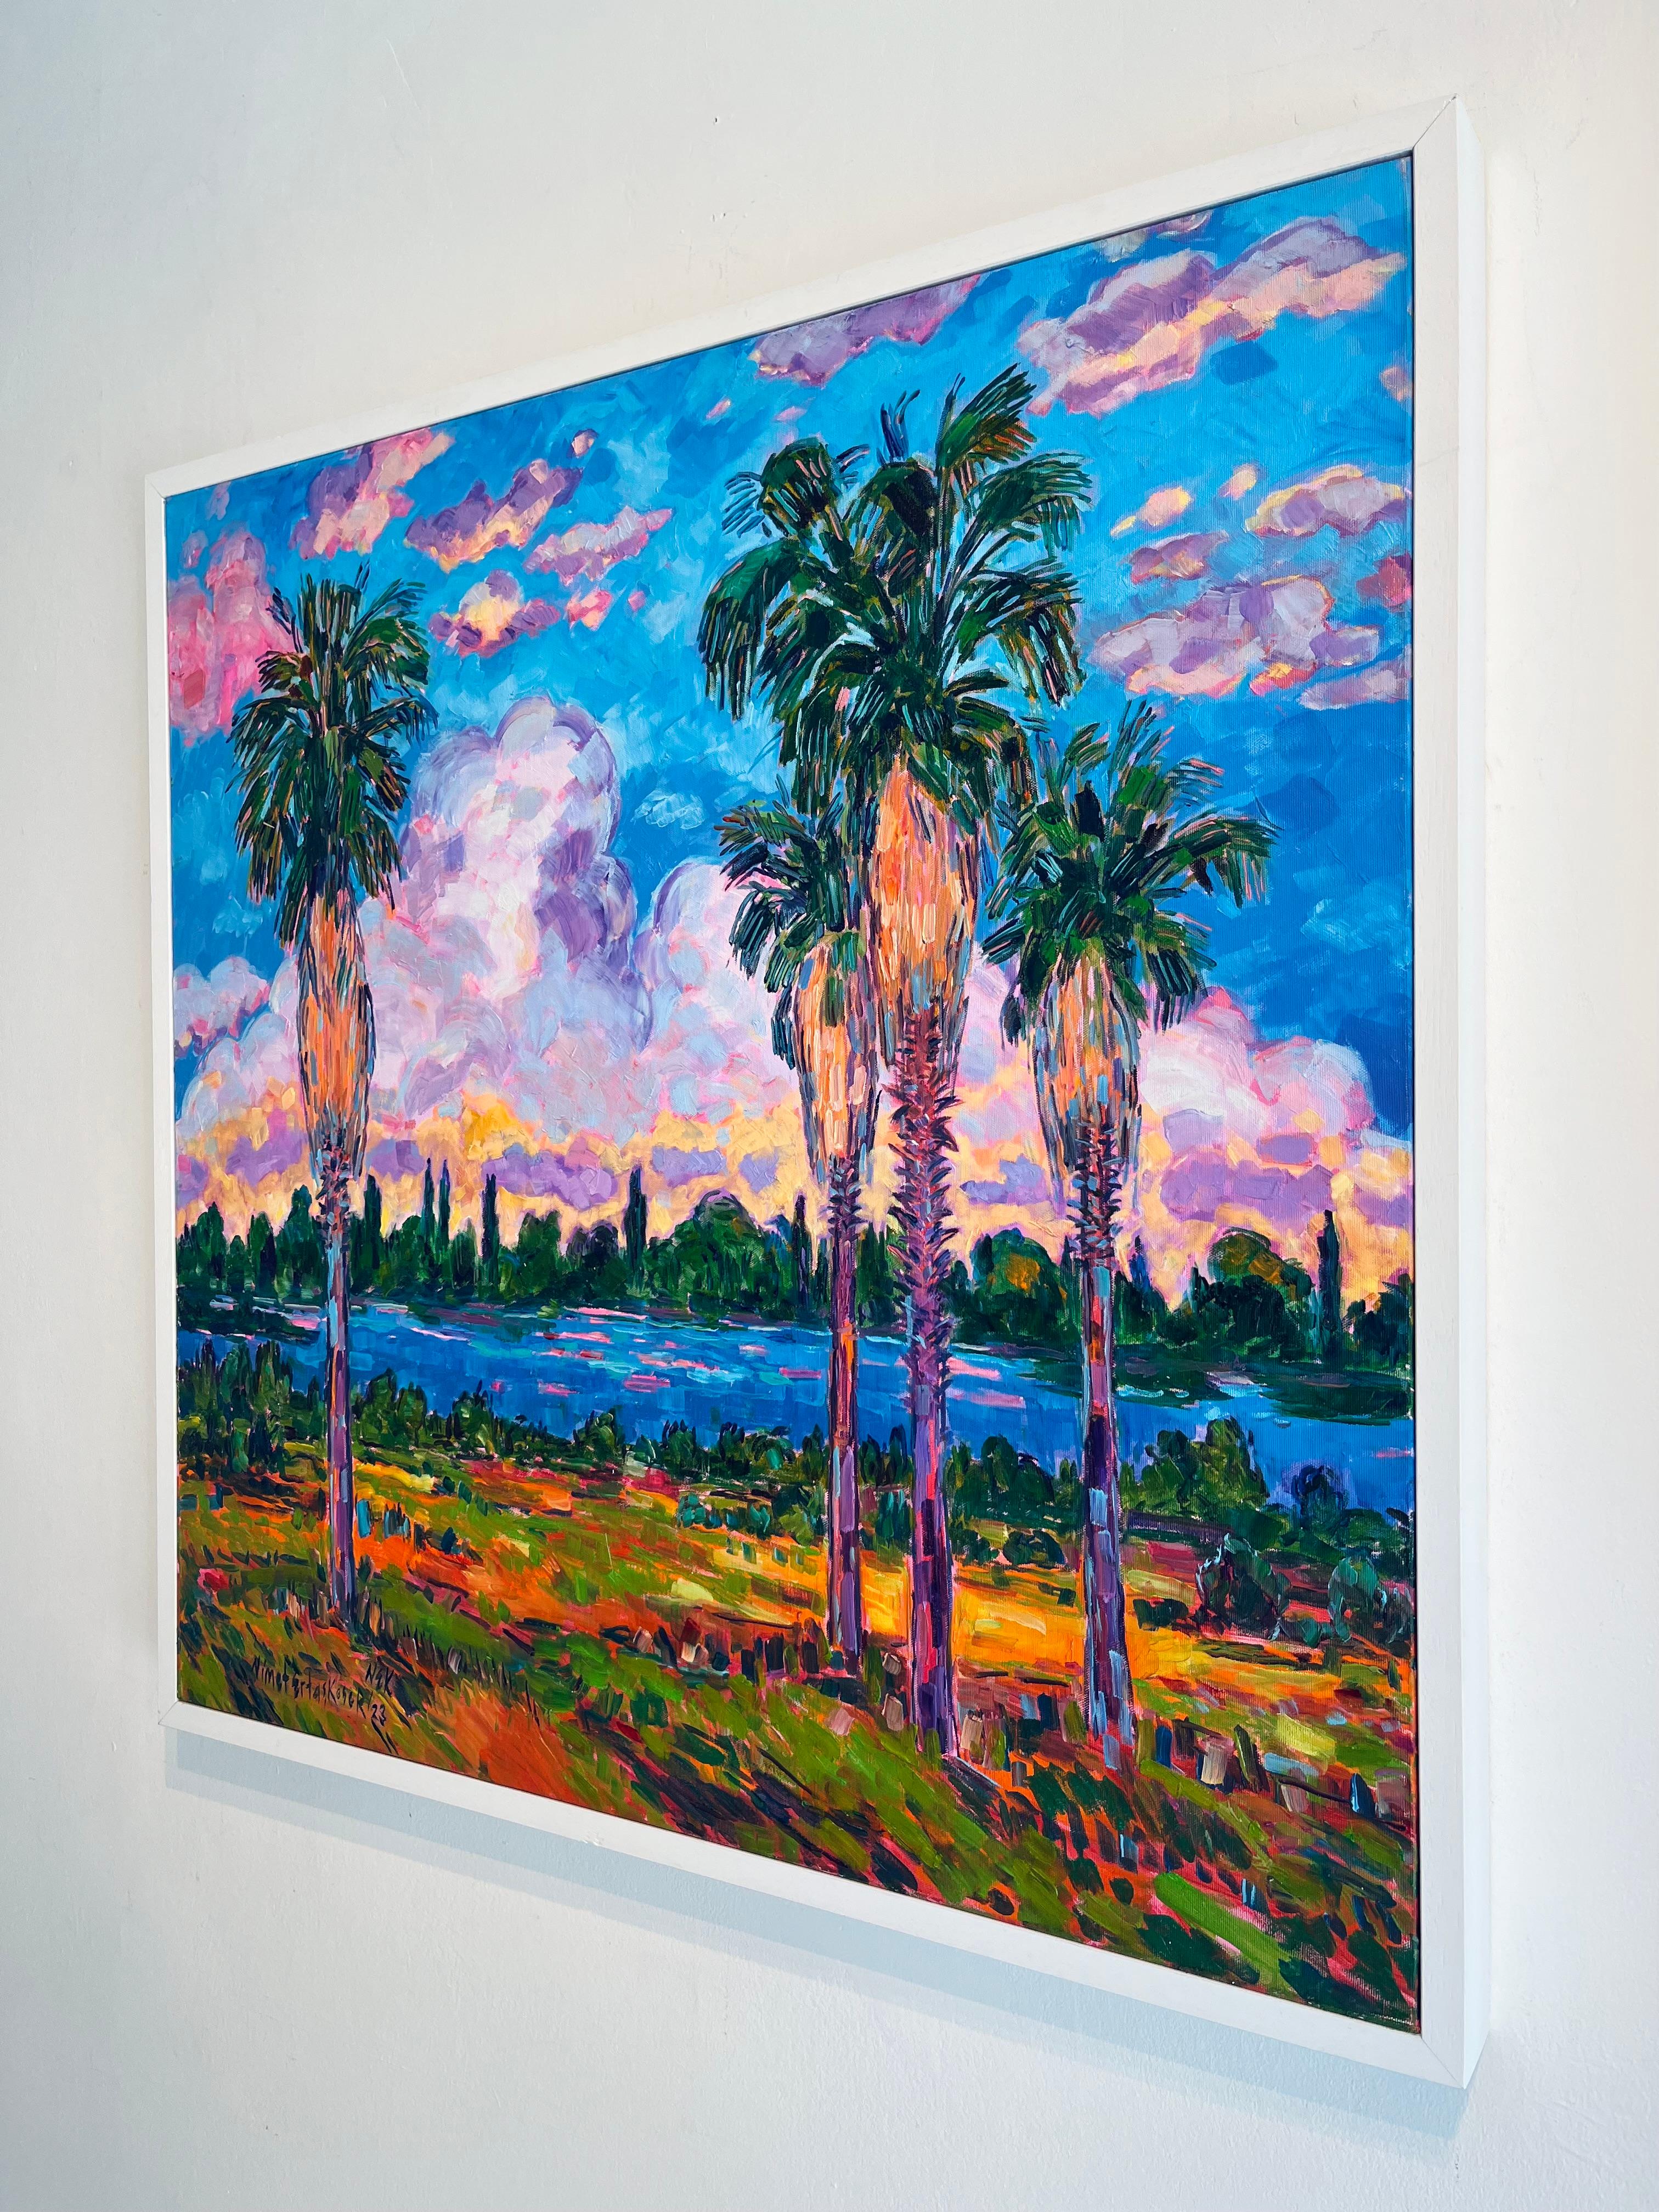 Palm trees by the River side & Sunset-original impressionism landscape painting - Impressionist Painting by Nimet Keser